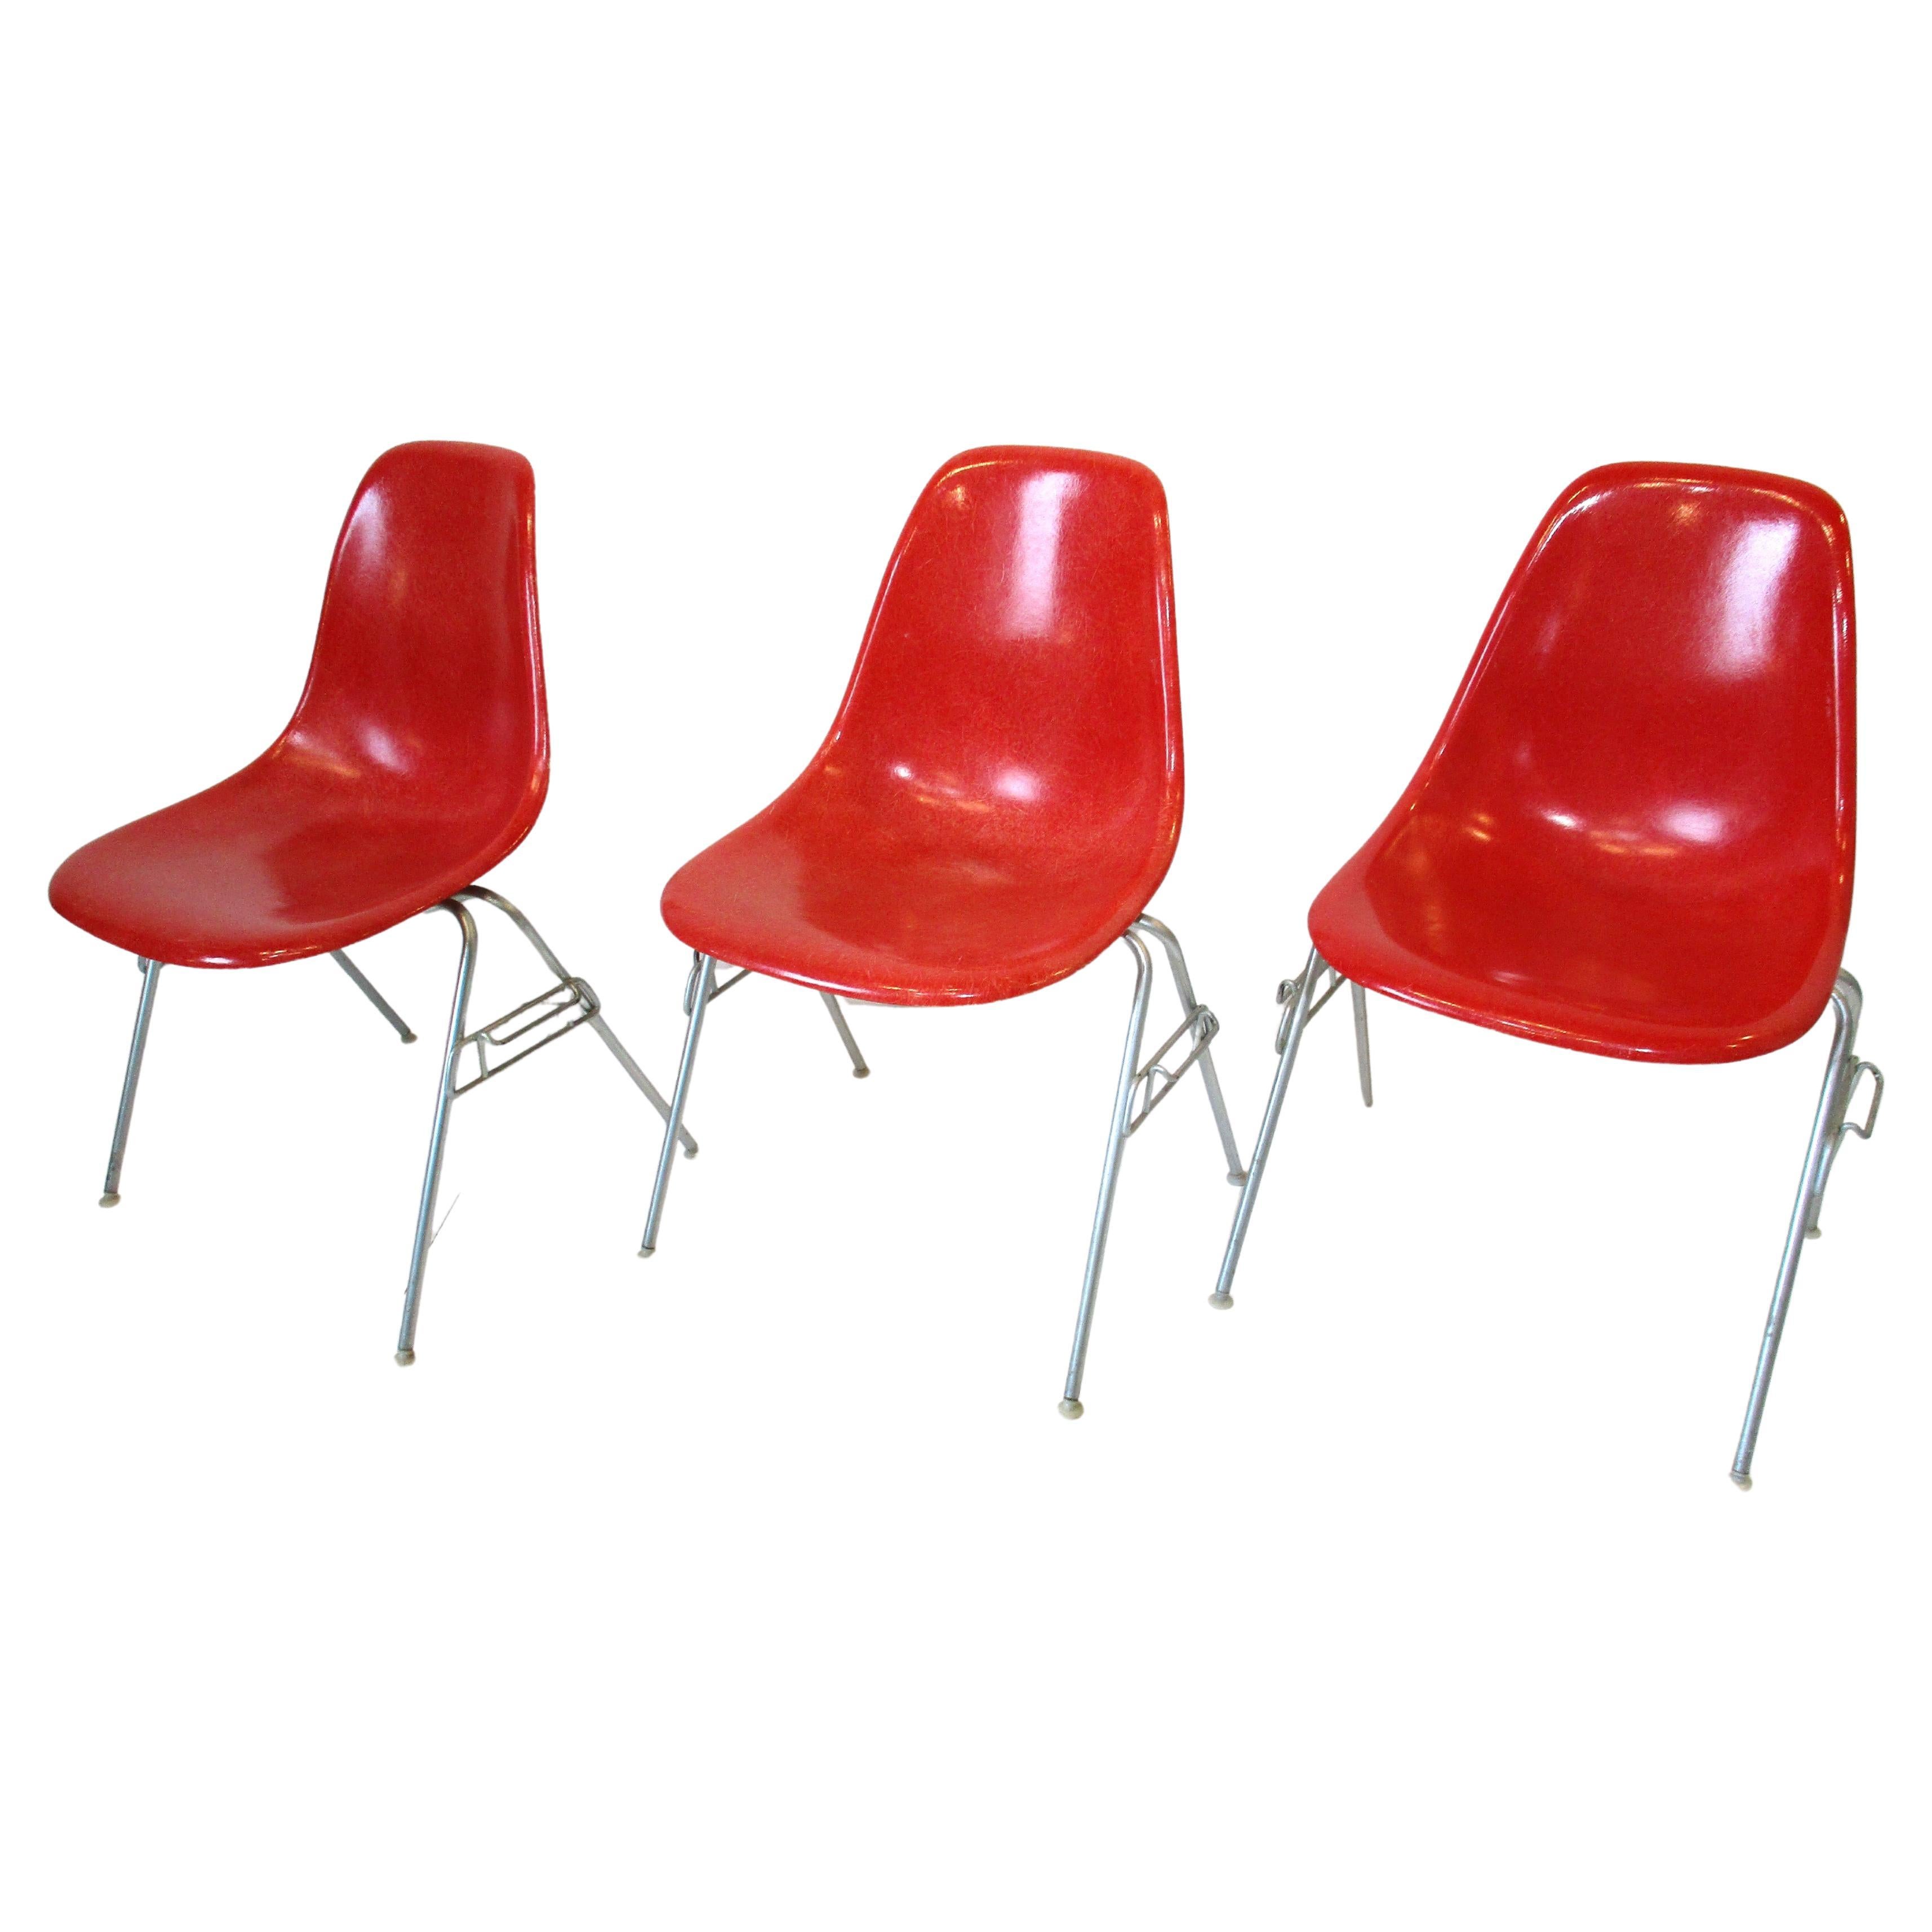 Eames Stacking DSS Side Shell Chairs for Herman Miller